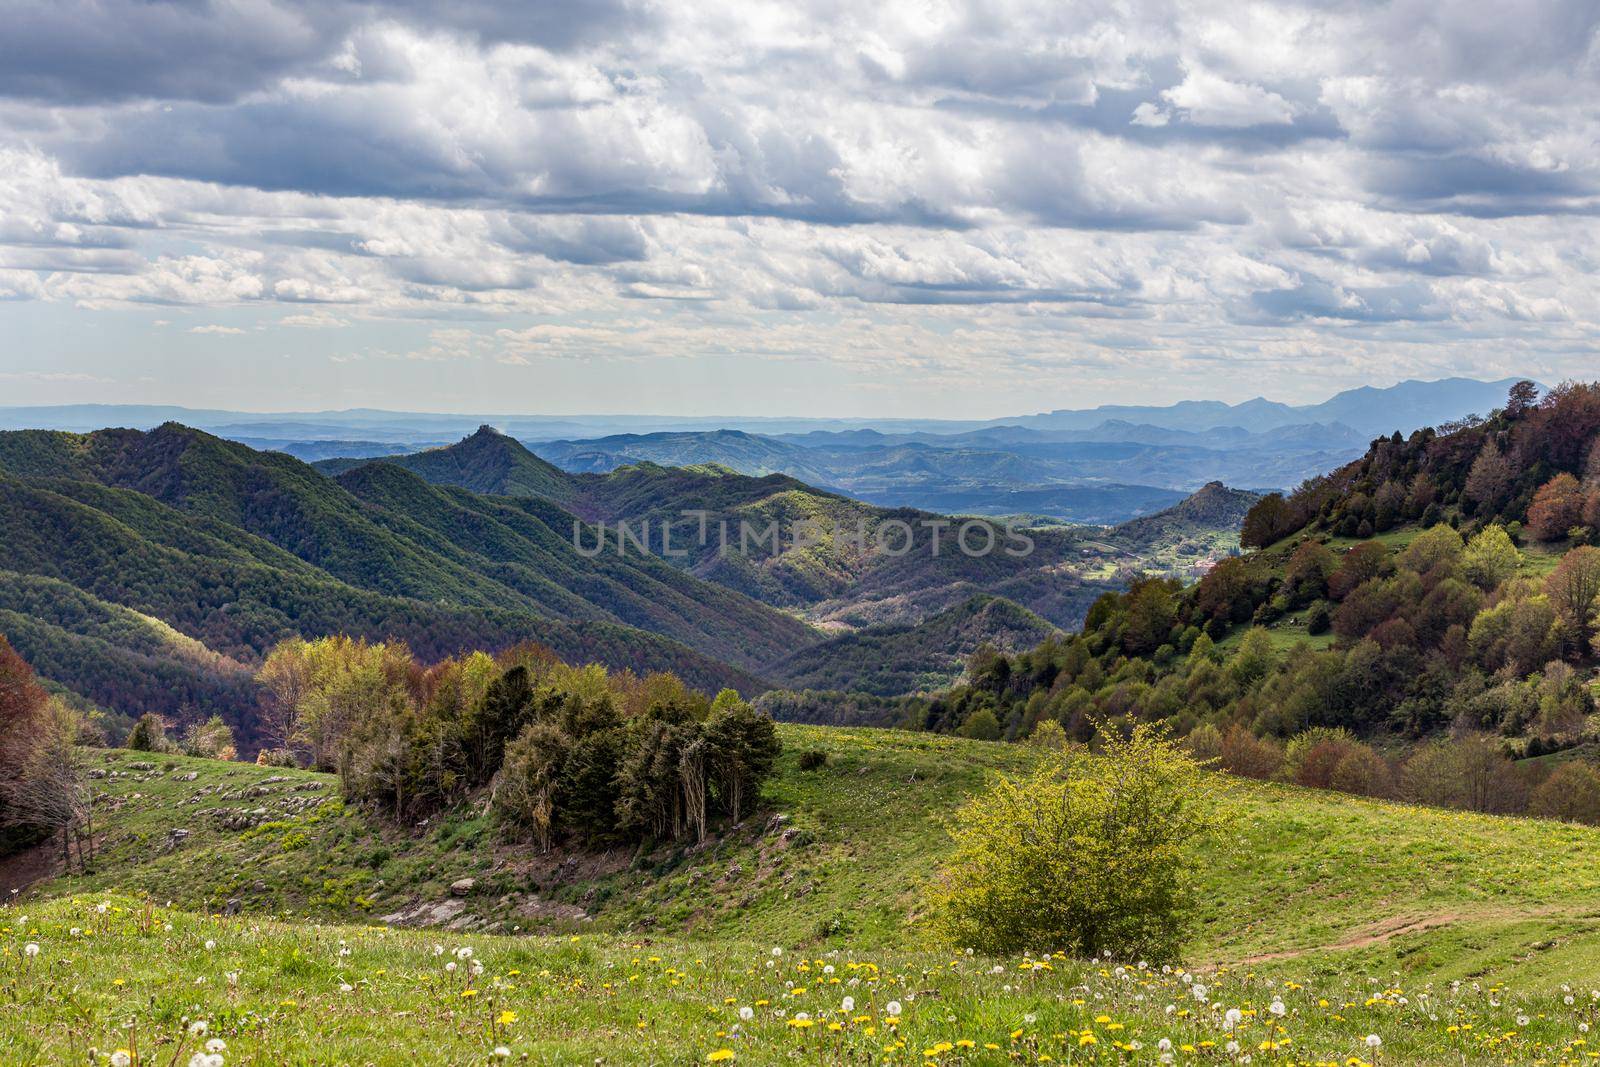 Mountain landscape in cloudy weather. Trees are changing color in the spring. Forest and green meadow in the foreground. Puigsacalm, Catalunya, Spain